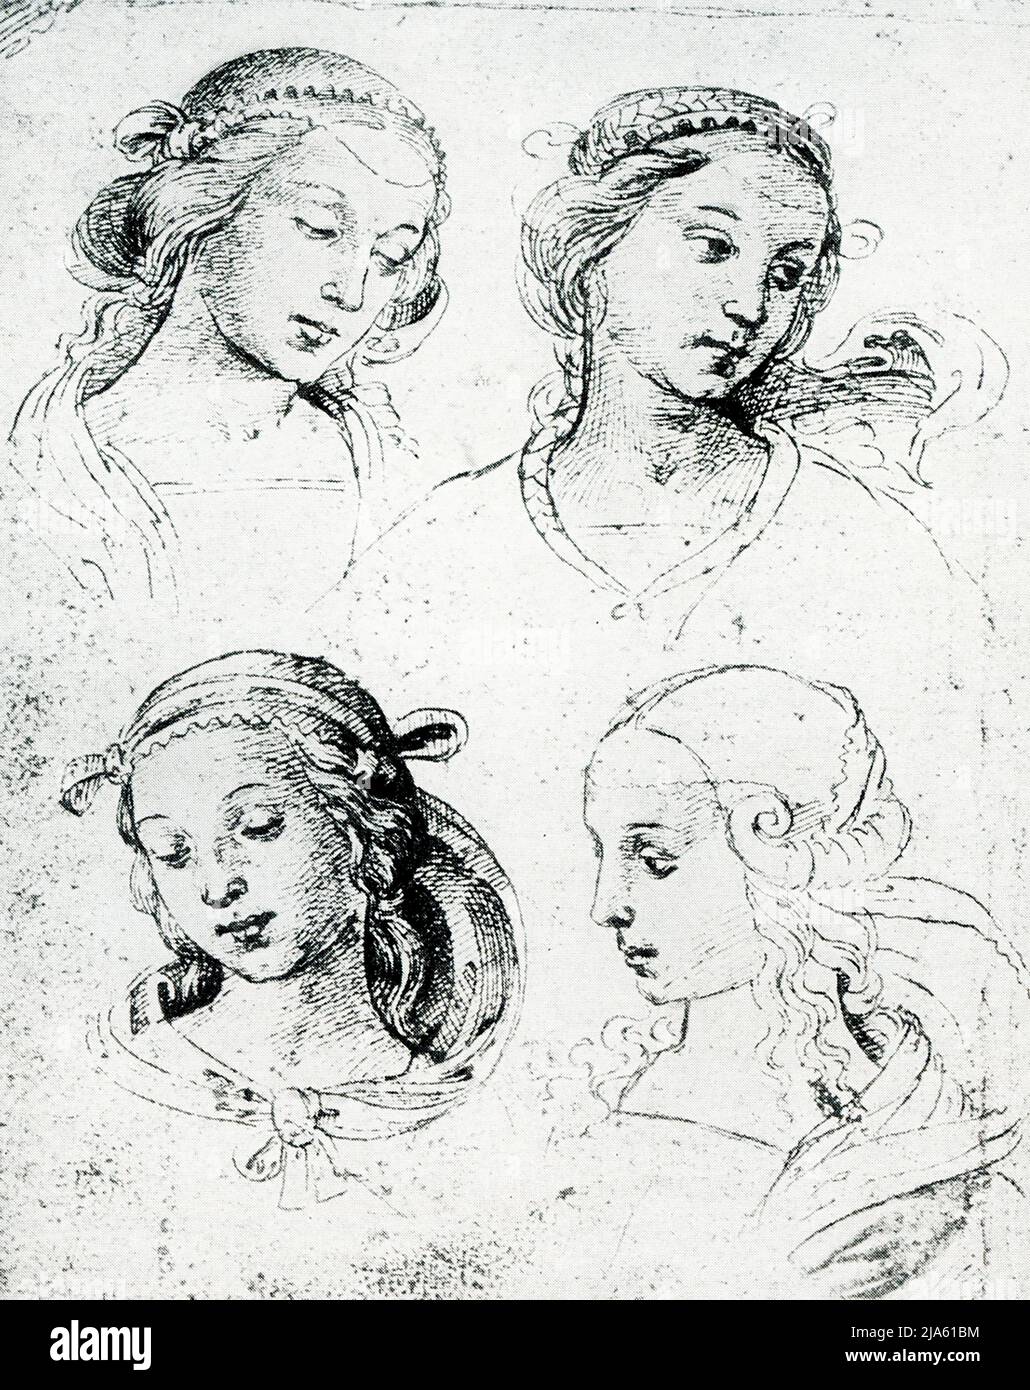 These drawings by Raphael (1483-1520) were done in sepia with a pen. The lines of the hair and drapery are flowing and free, the dark shadows suggested by a heavier touch or cross lines. The eyes are large, carefully placed, and carefully drawn. The two upper heads probably done with brown crayon pencil. The lower right is a pen drawing full of rugged individual character. Raffaello Sanzio da Urbino was an Italian painter and architect of the High Renaissance. His work is admired for its clarity of form, ease of composition, and visual achievement of the Neoplatonic ideal of human grandeur. Stock Photo